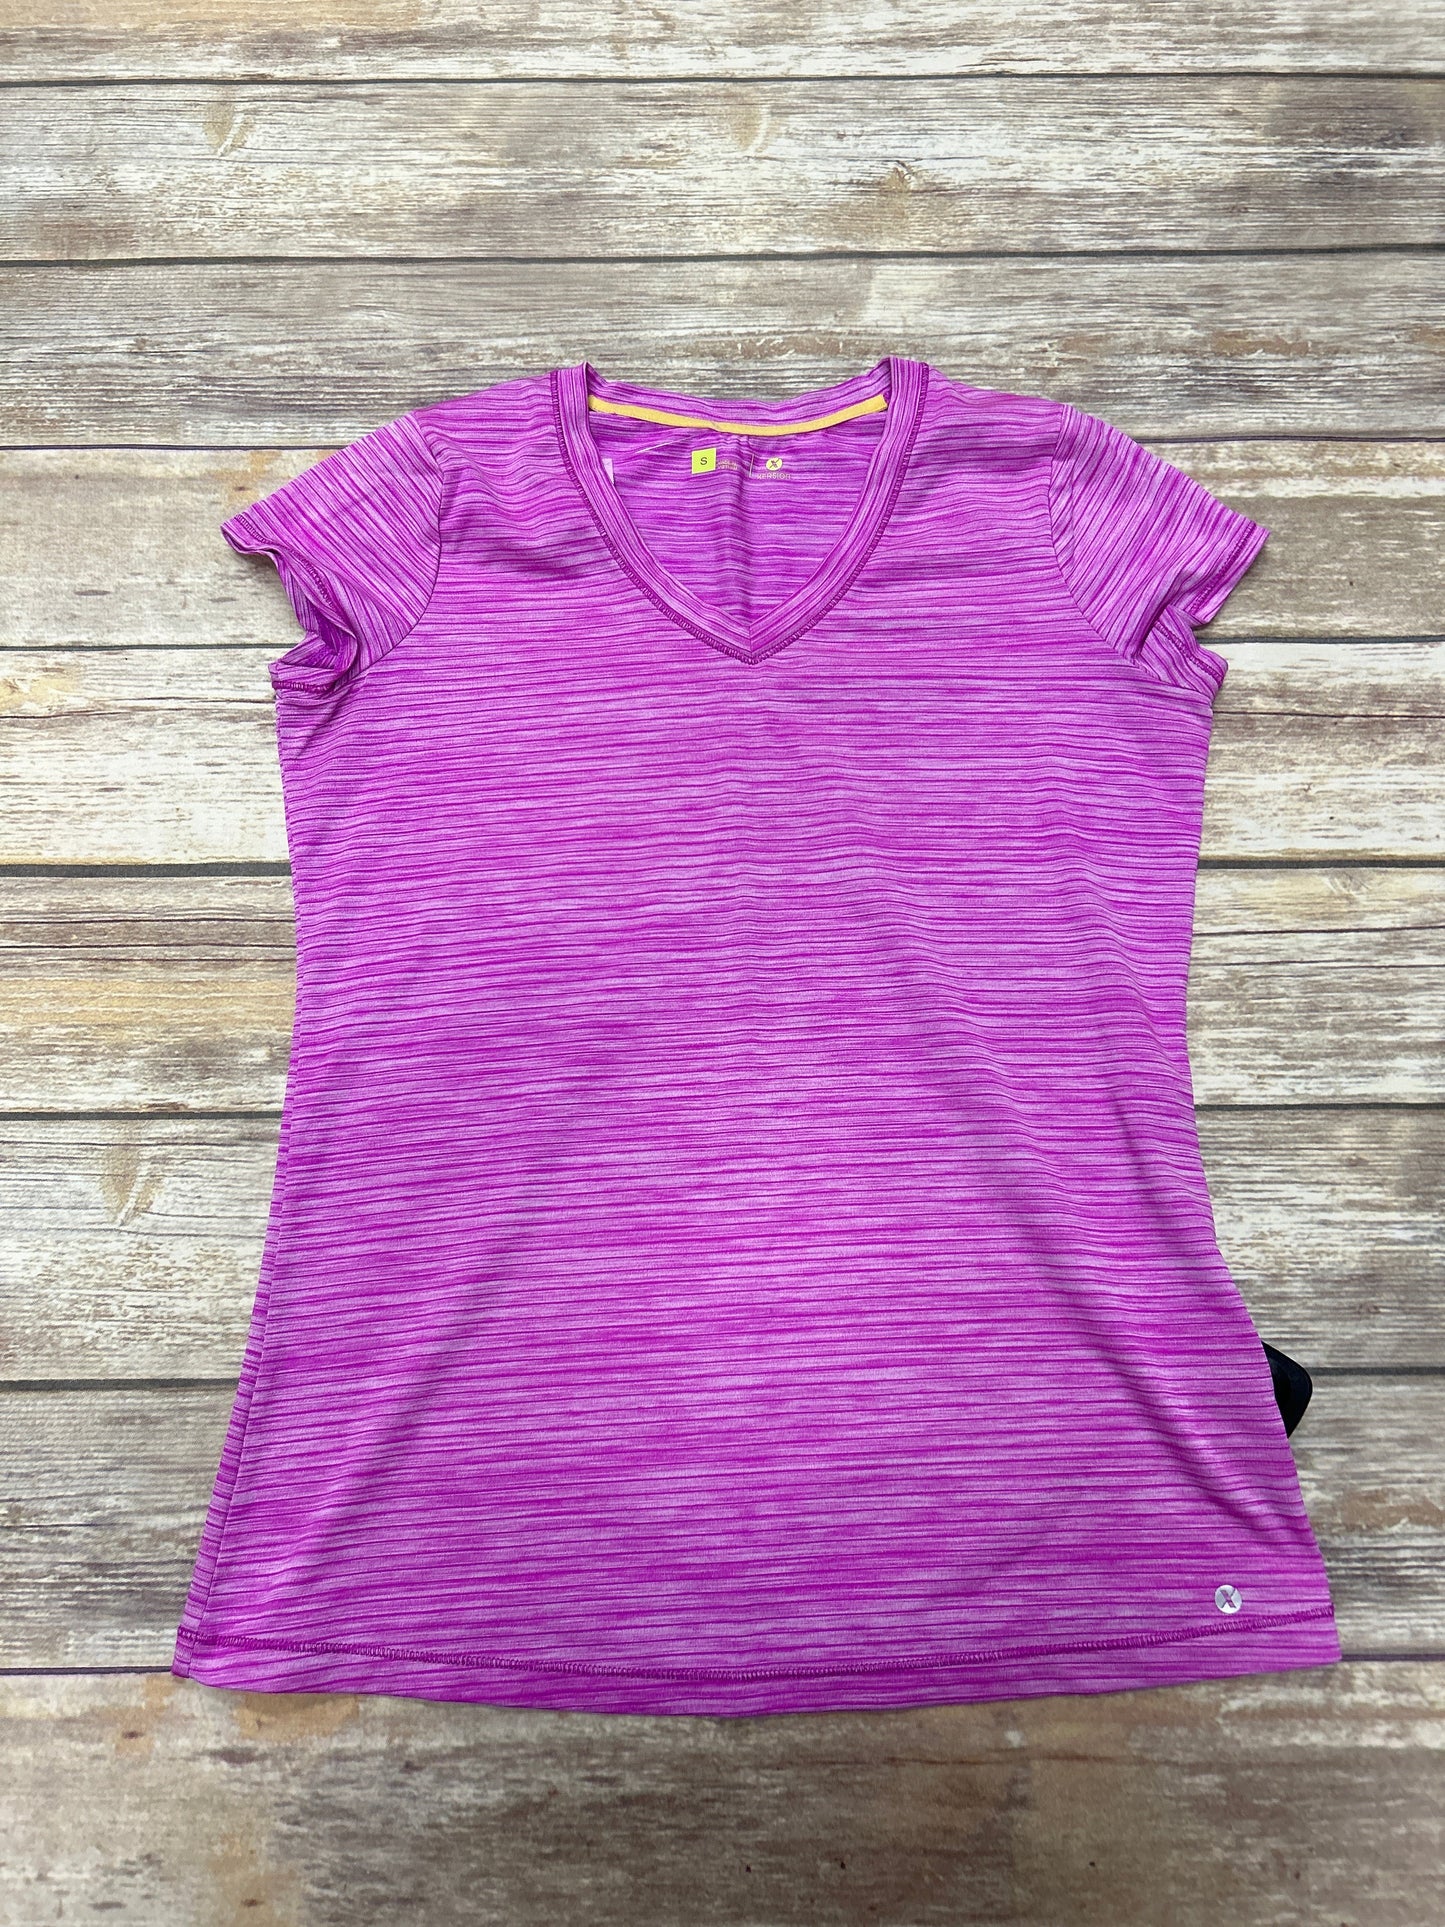 Purple Athletic Top Short Sleeve Xersion, Size S